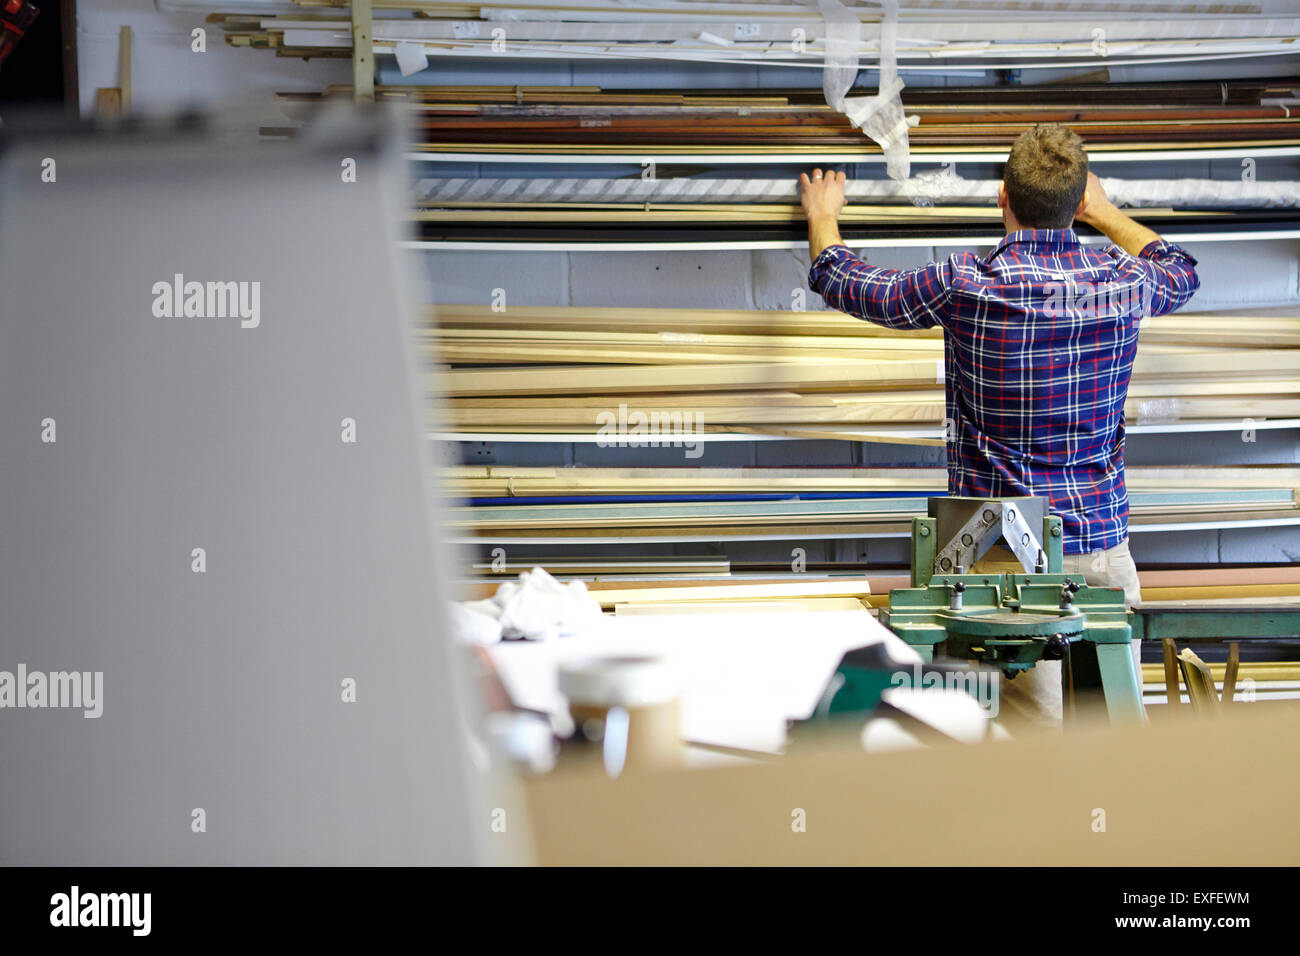 Rear view of man searching stockroom shelves in picture framers workshop Stock Photo